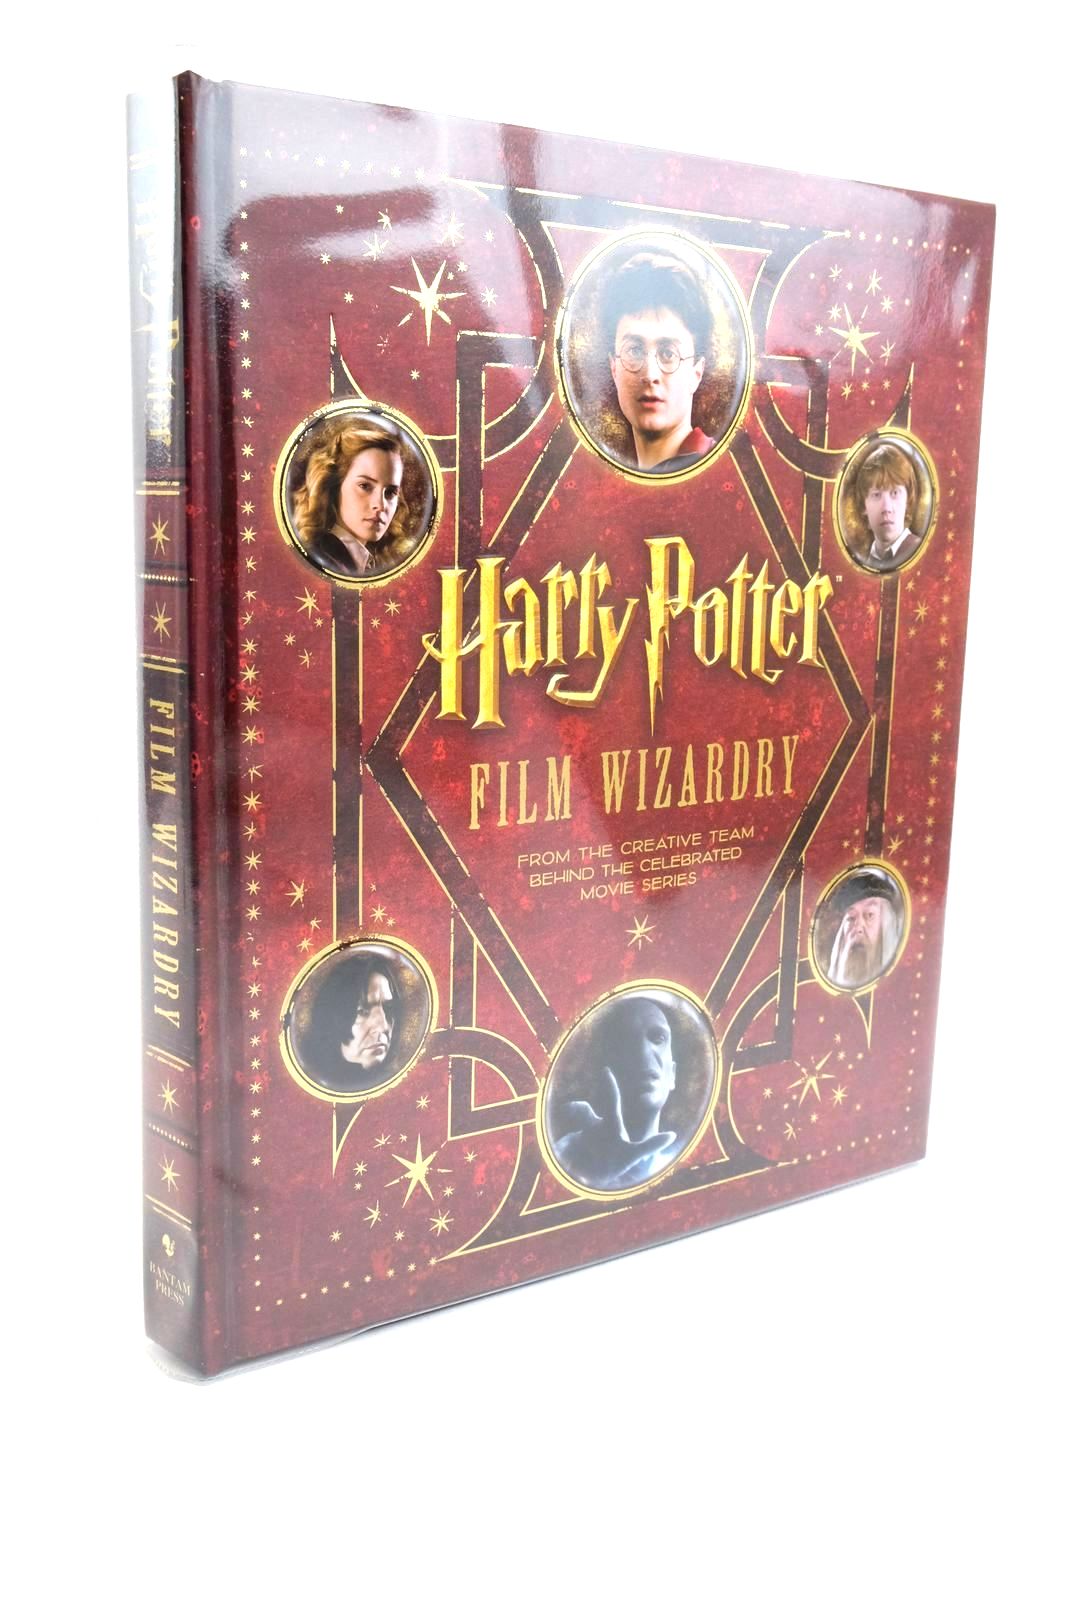 Photo of HARRY POTTER FILM WIZARDRY written by Sibley, Brian published by Bantam Press (STOCK CODE: 1322288)  for sale by Stella & Rose's Books